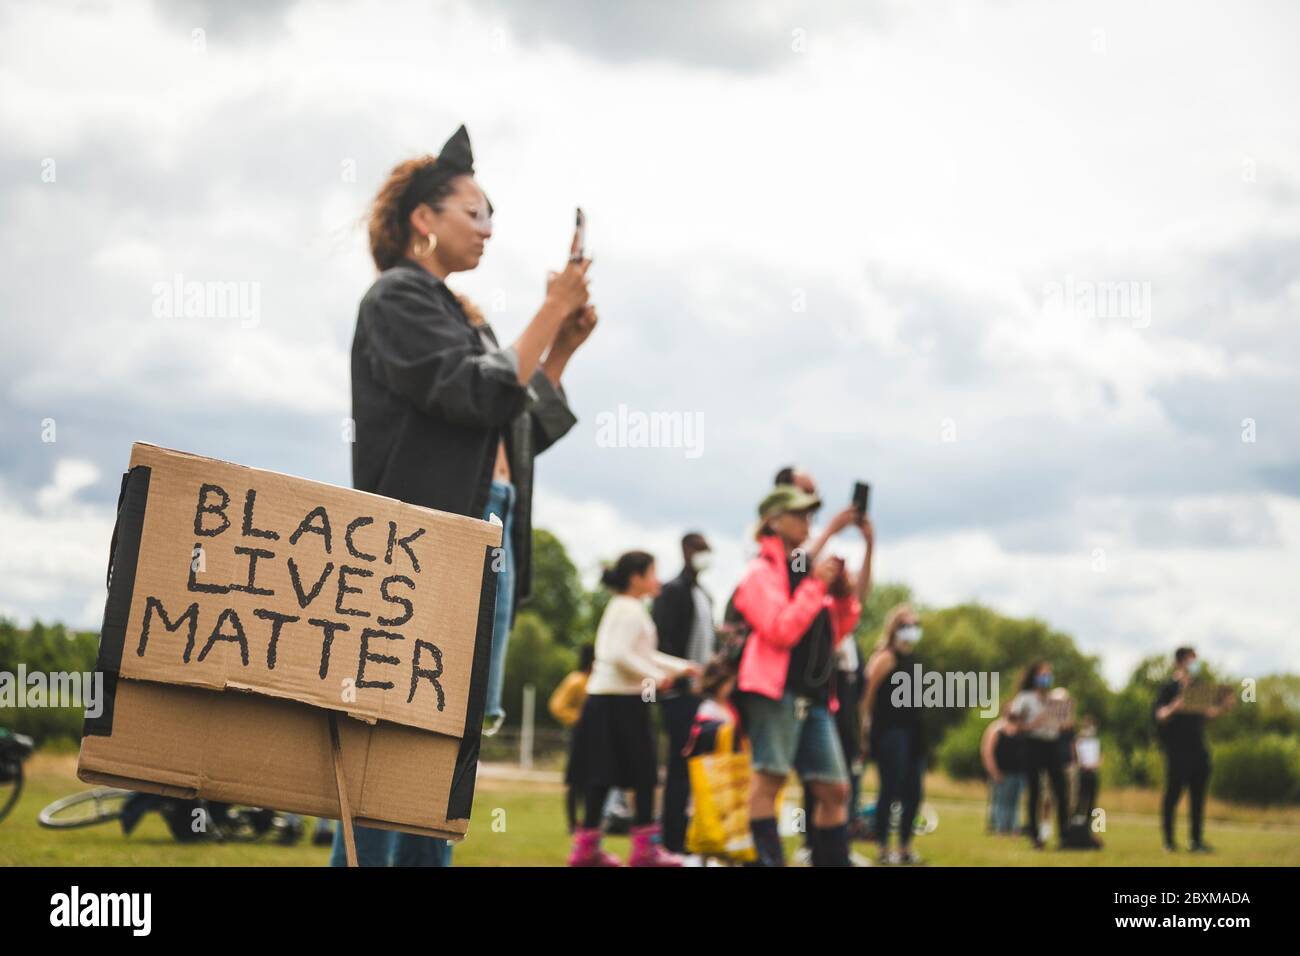 Protest in support of 'Black lives matter' in a park in Haringey, London UK.  Protest for the American George Floyd. Credit Krisztian Sipos Stock Photo